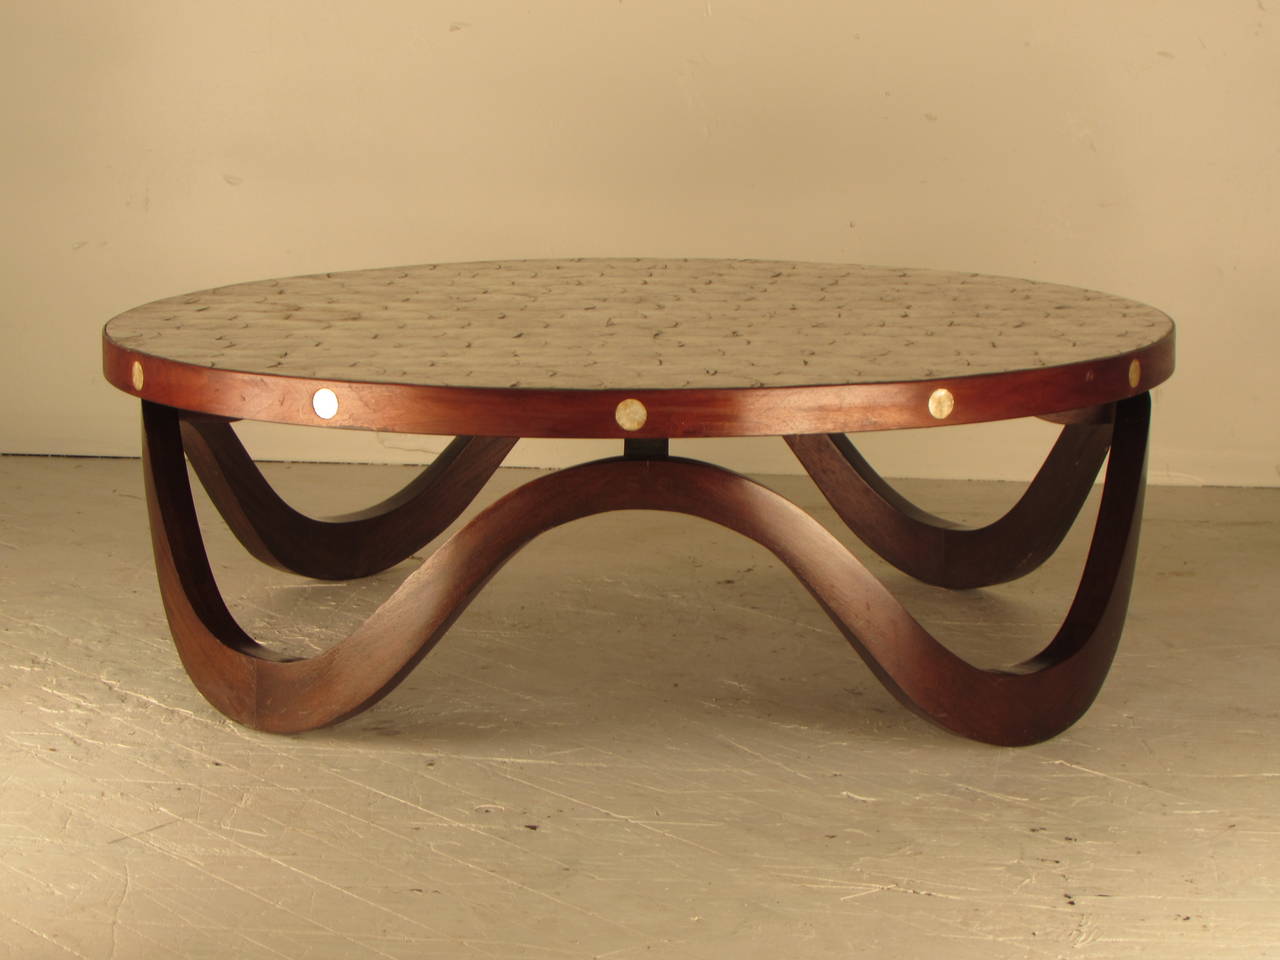 Absolutely marvelous 1940s cocktail table with sculptural, undulating walnut frame and radiant capiz shell top and inlays. Really an extraordinary piece, we've never seen another one like it!

Overall excellent condition with minor wear consistent